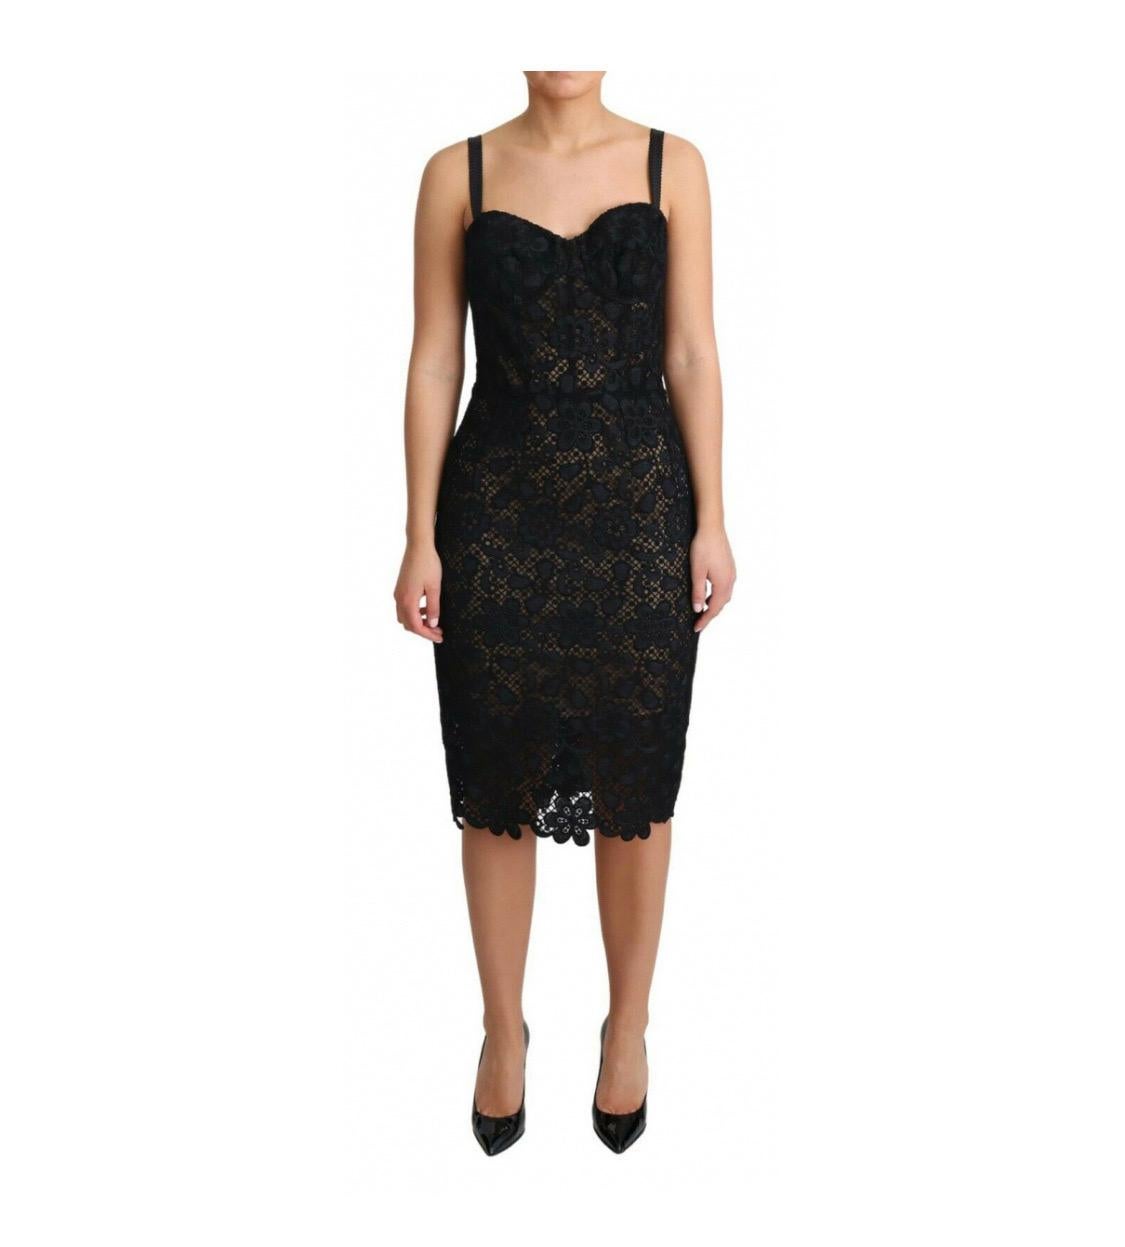 Dolce & Gabbana sleeveless sheath dress is
overlaid in delicate floral lace 6